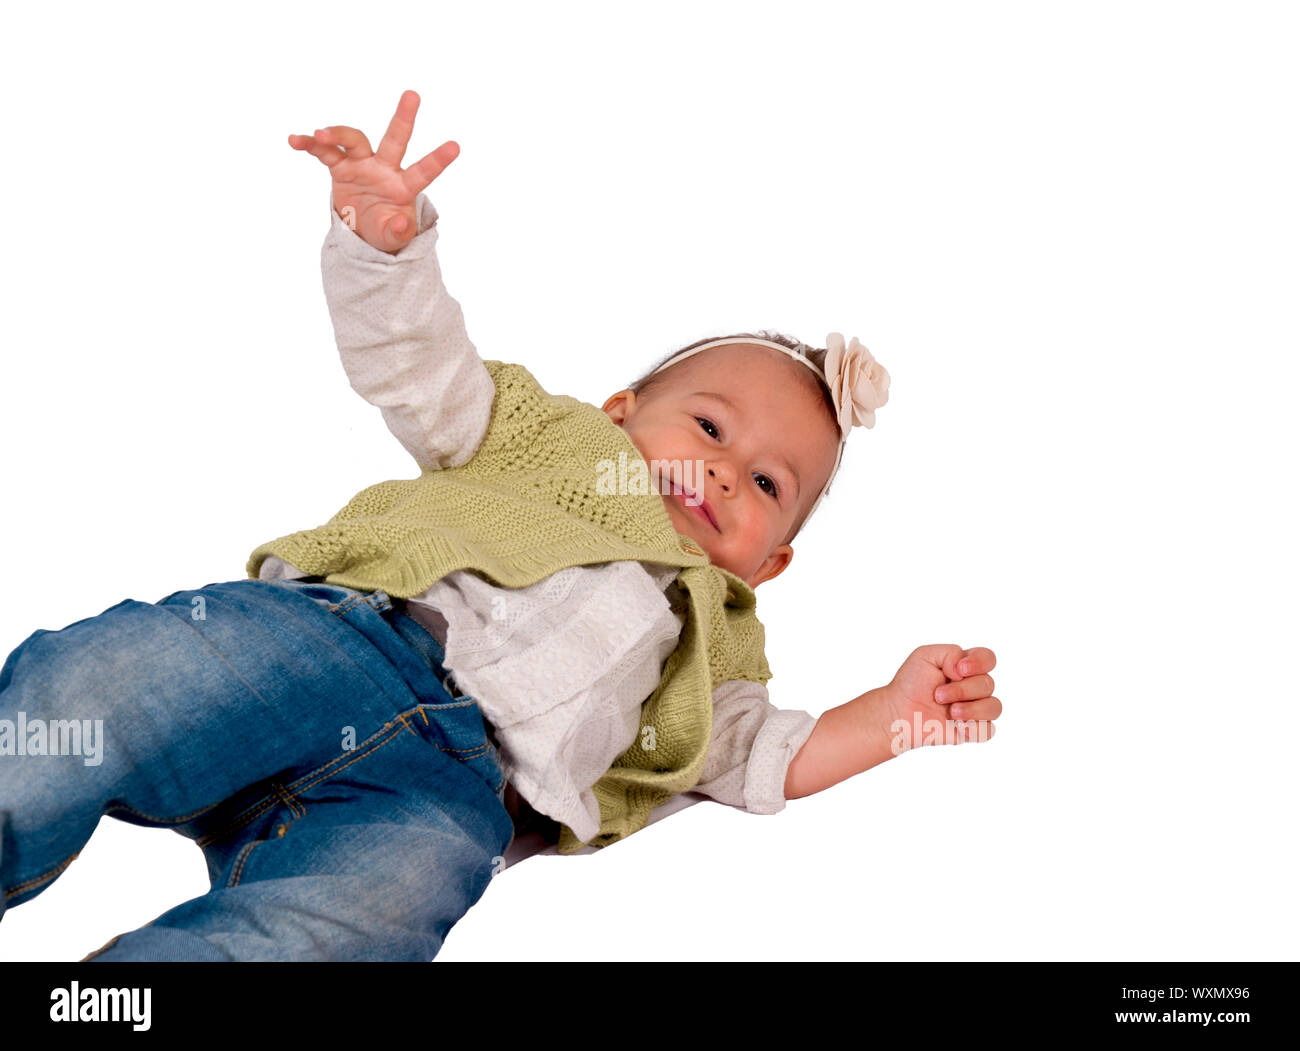 Kid falling down Cut Out Stock Images & Pictures - Alamy